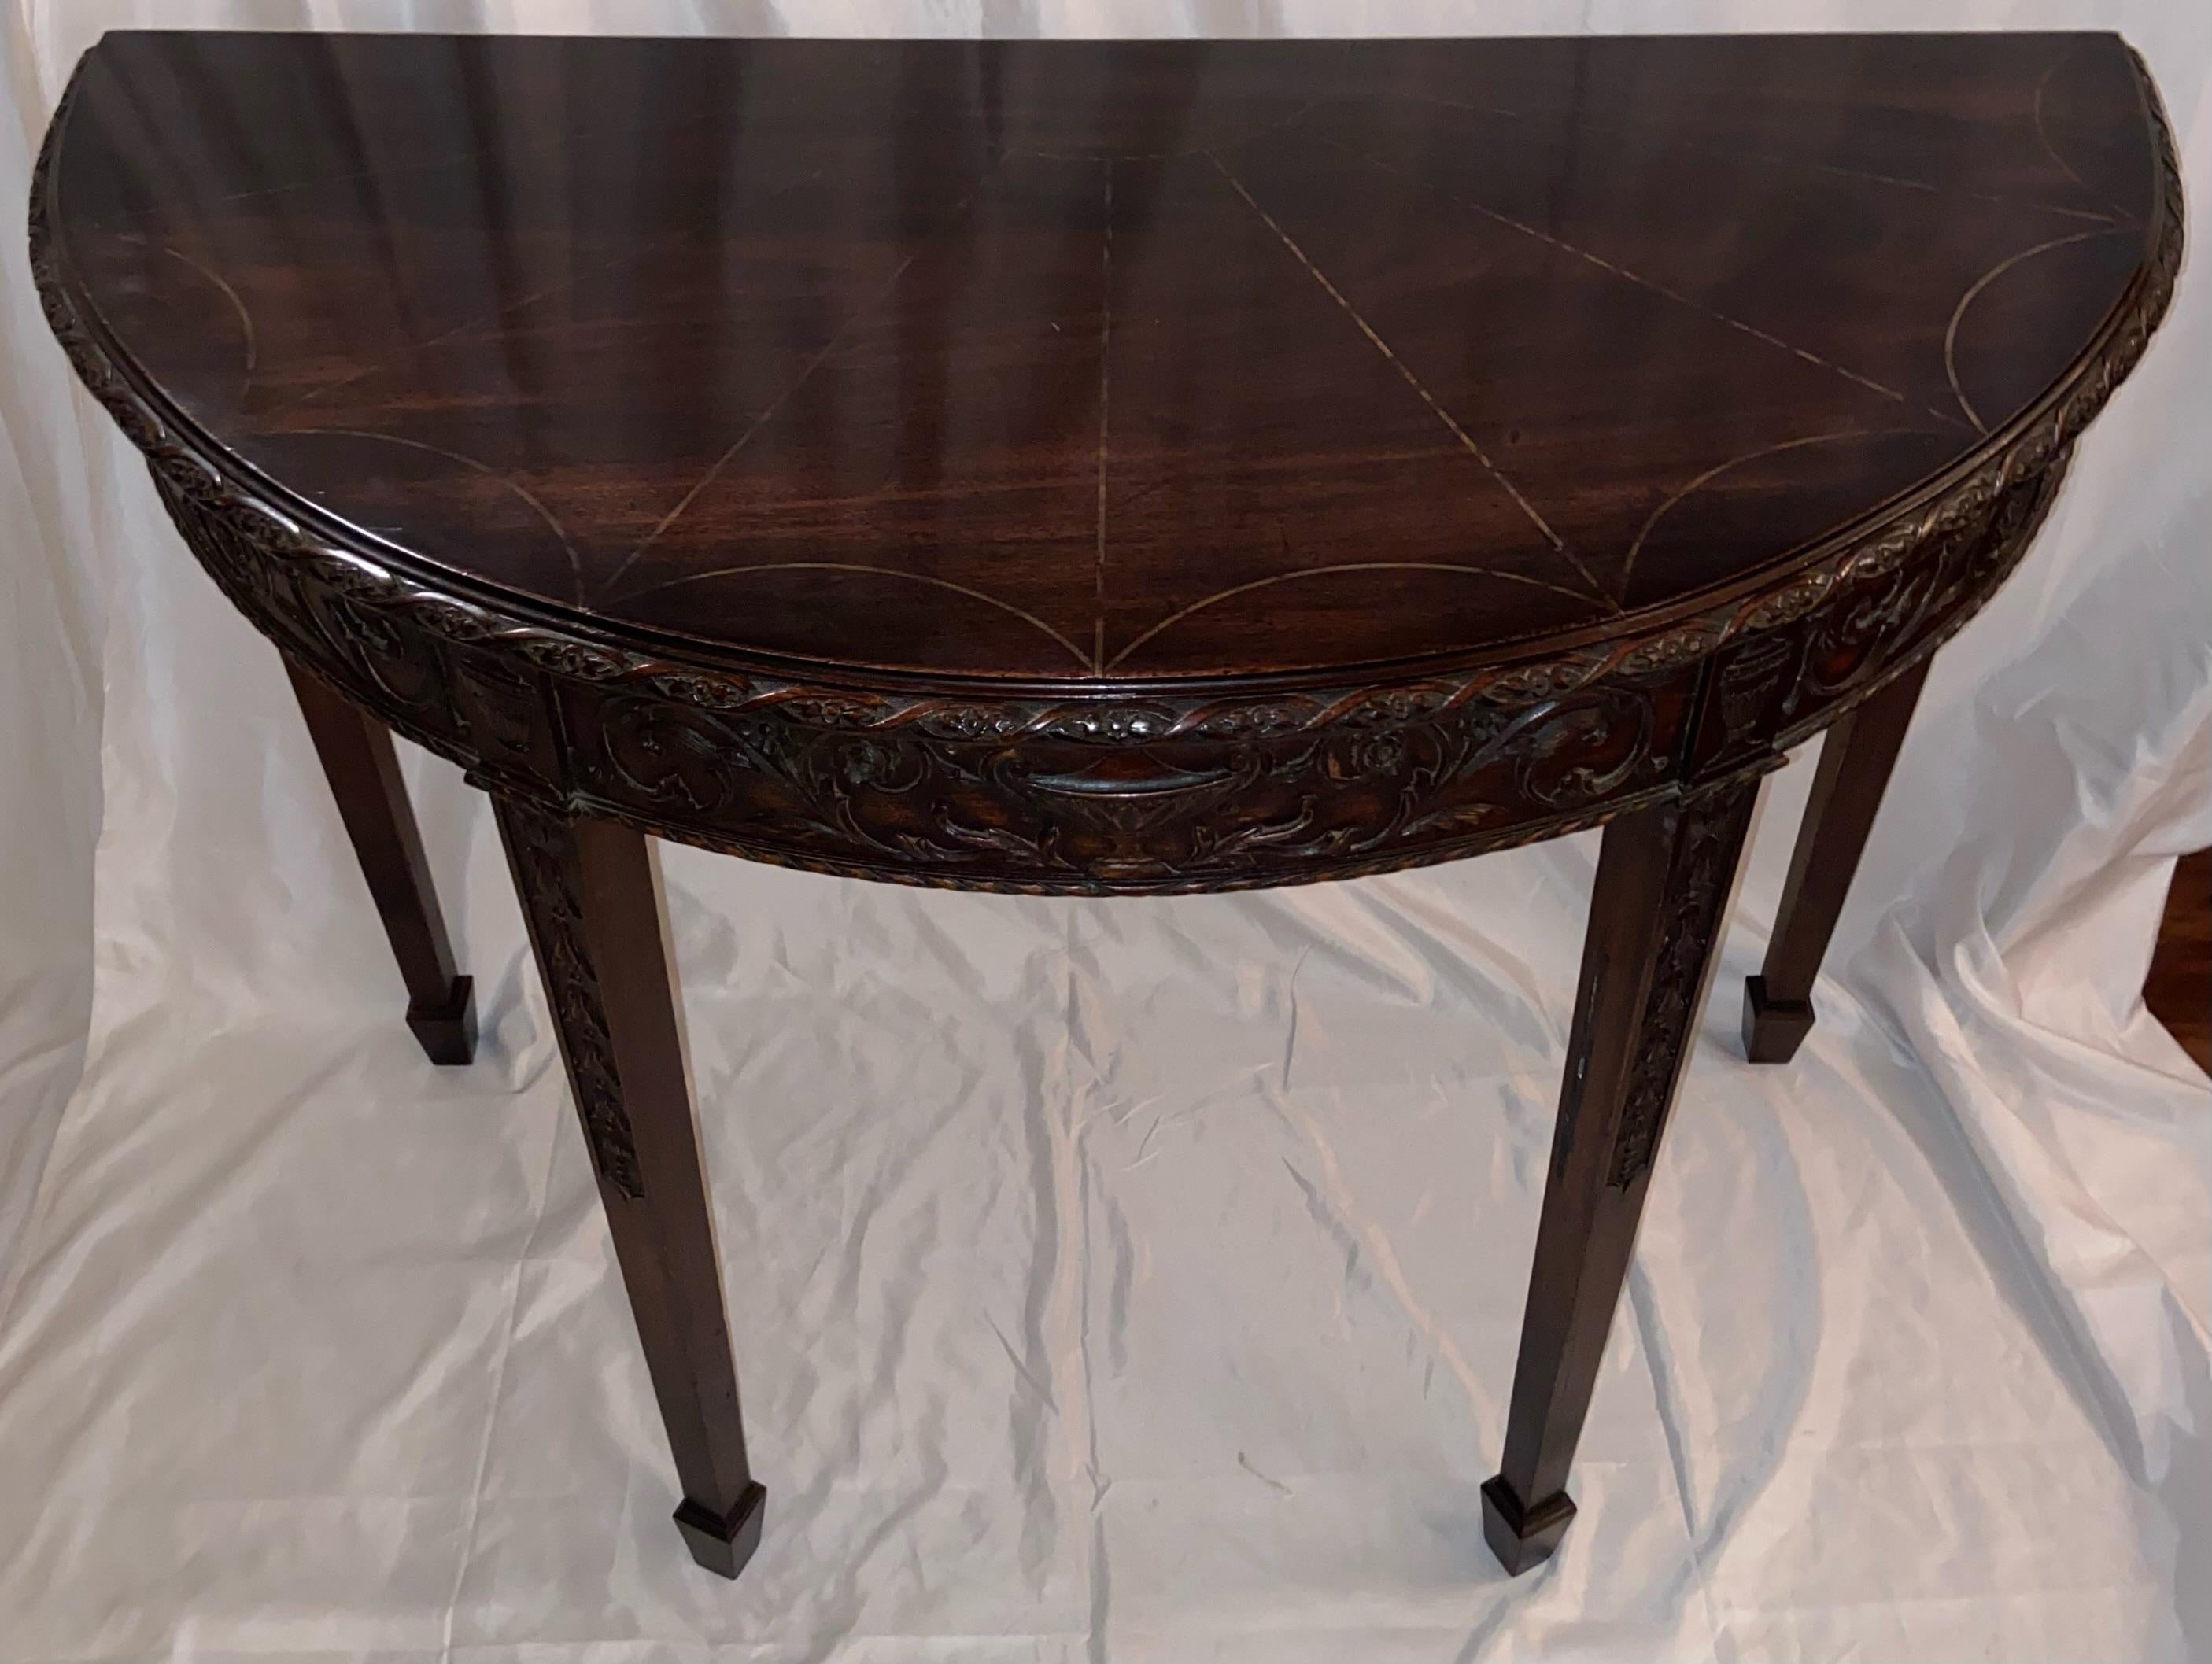 Pair Antique English Inlaid Mahogany Demi-Lune Console Tables, Circa 1880's. For Sale 2